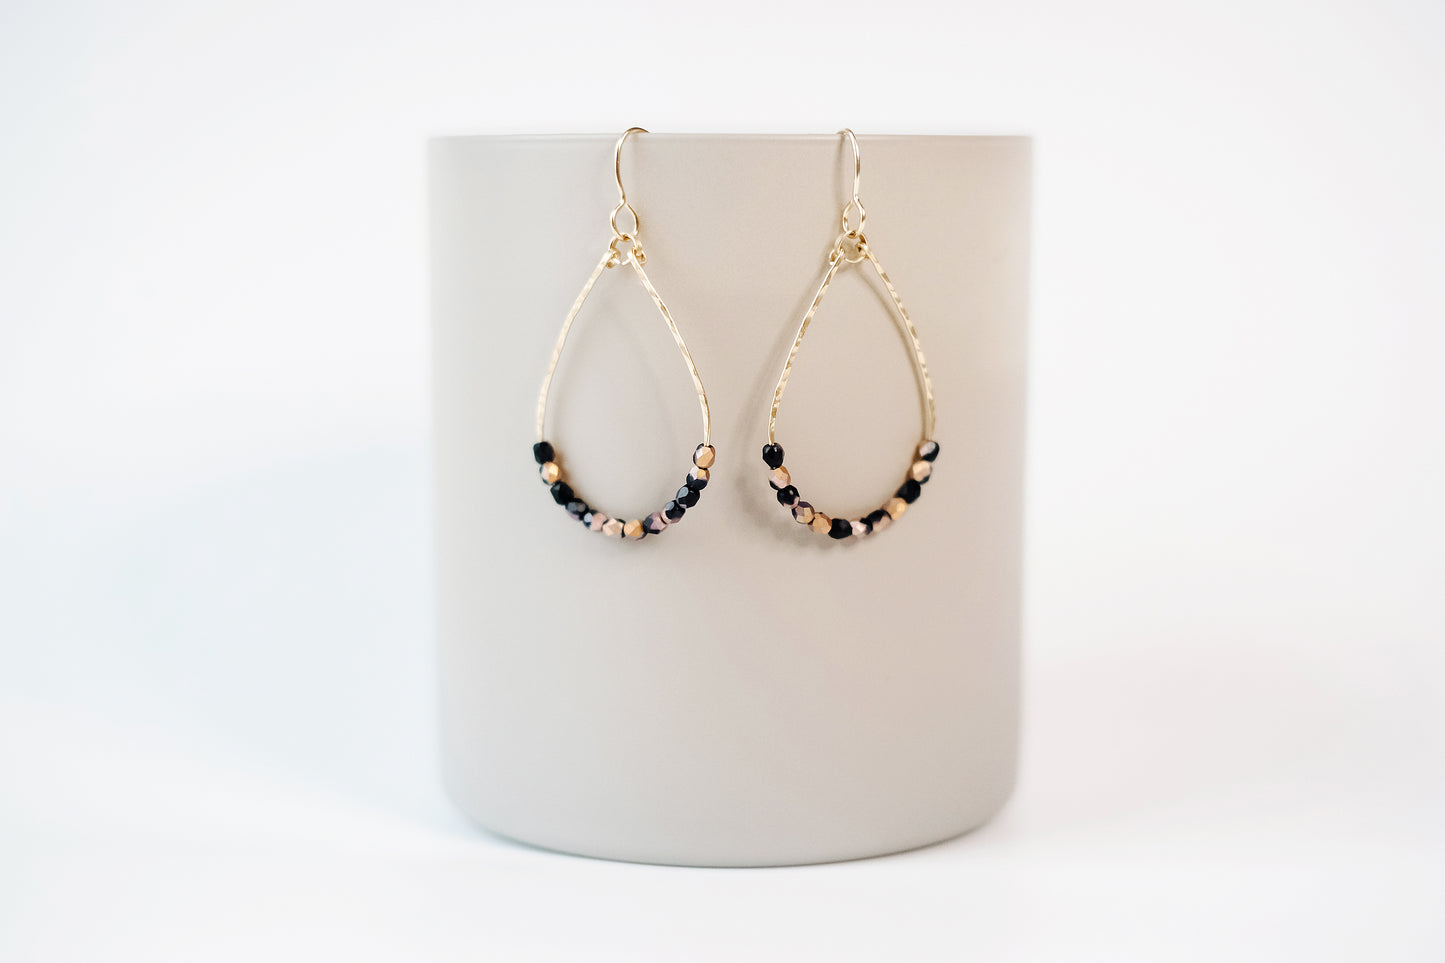 Gold teardrop shaped dangle earrings, strung with 12 black and pink speckled faceted glass beads that rest at the bottom of the teardrop shape, hanging from a beige colored cylinder.